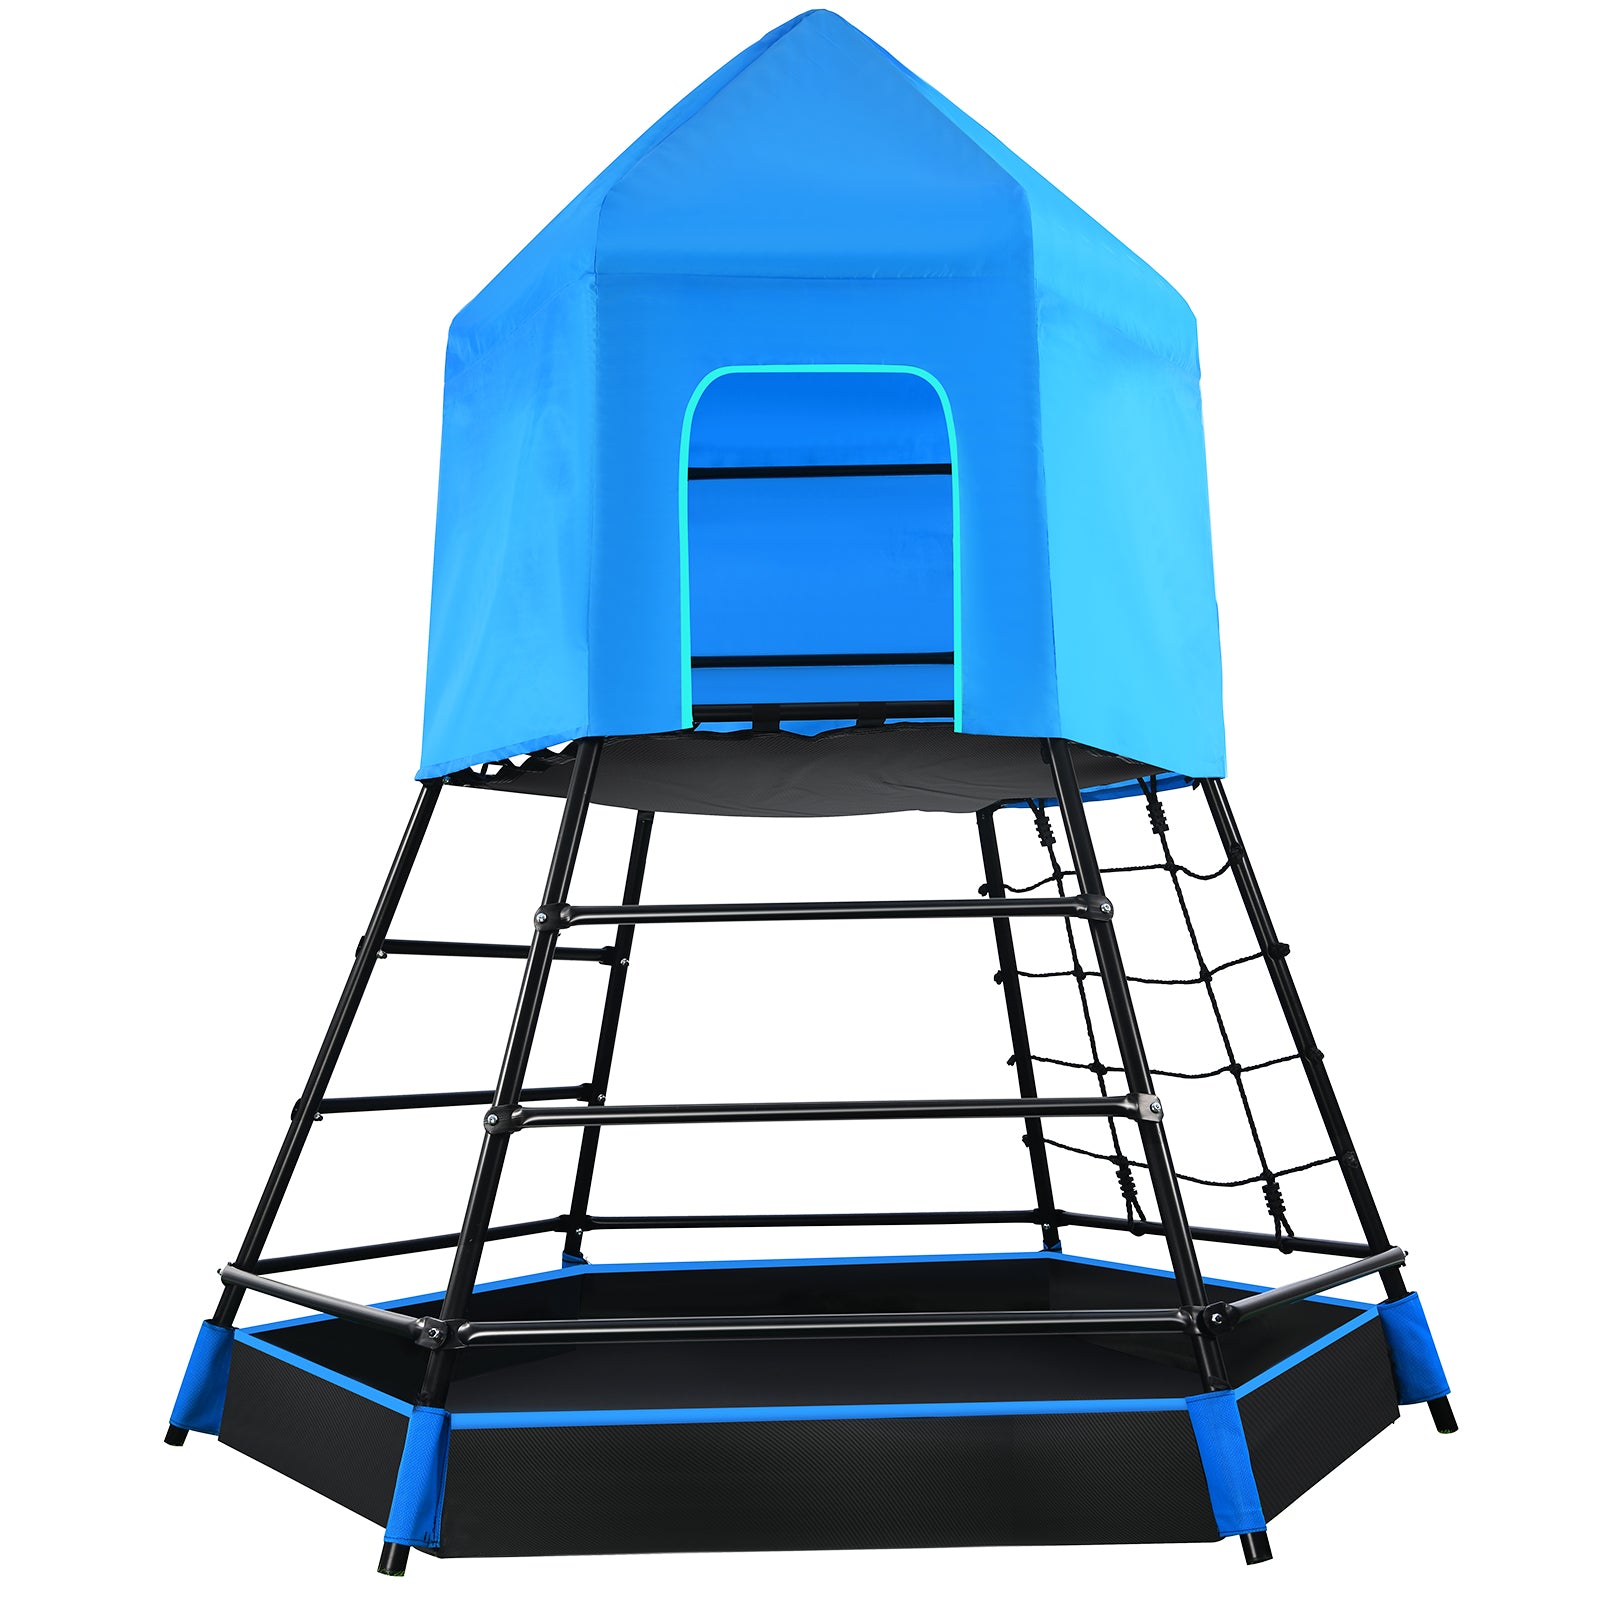 Hapfan Jungle Gym with Platform and Tent, Climbing Toys with Monkey Bars for Kids Age 1-12